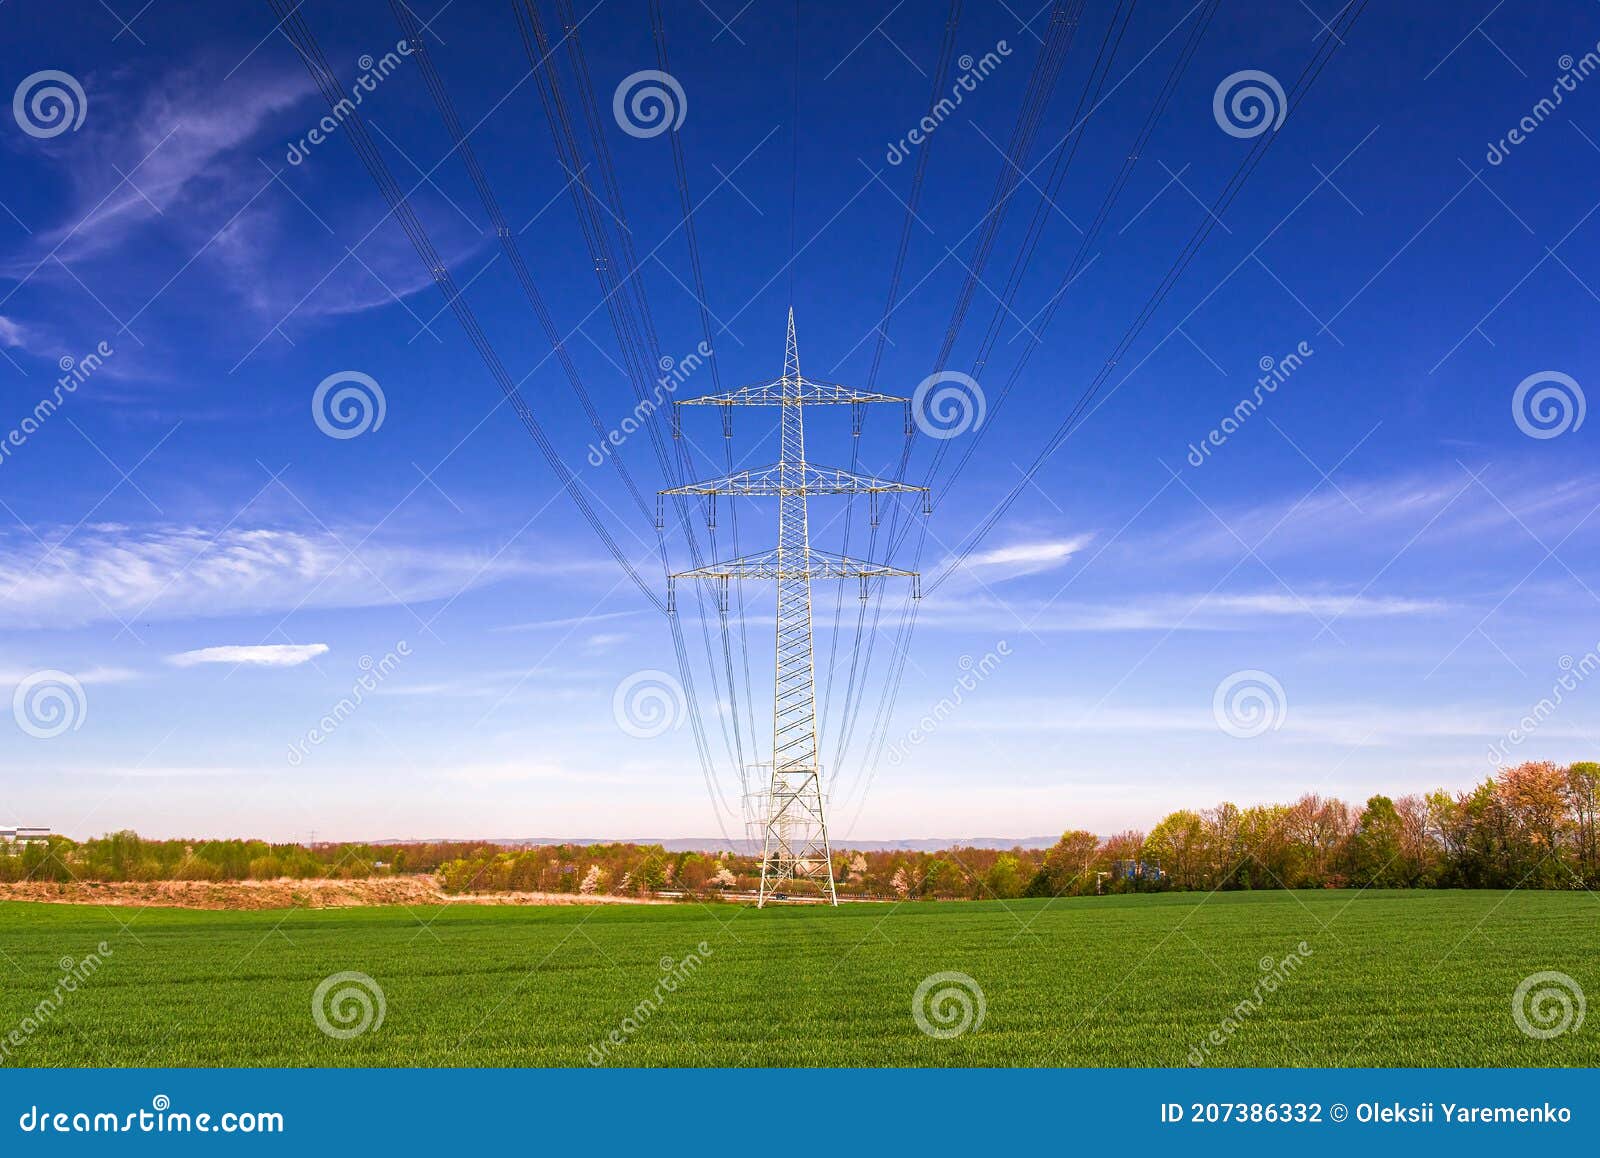 high-voltage tower sky background .